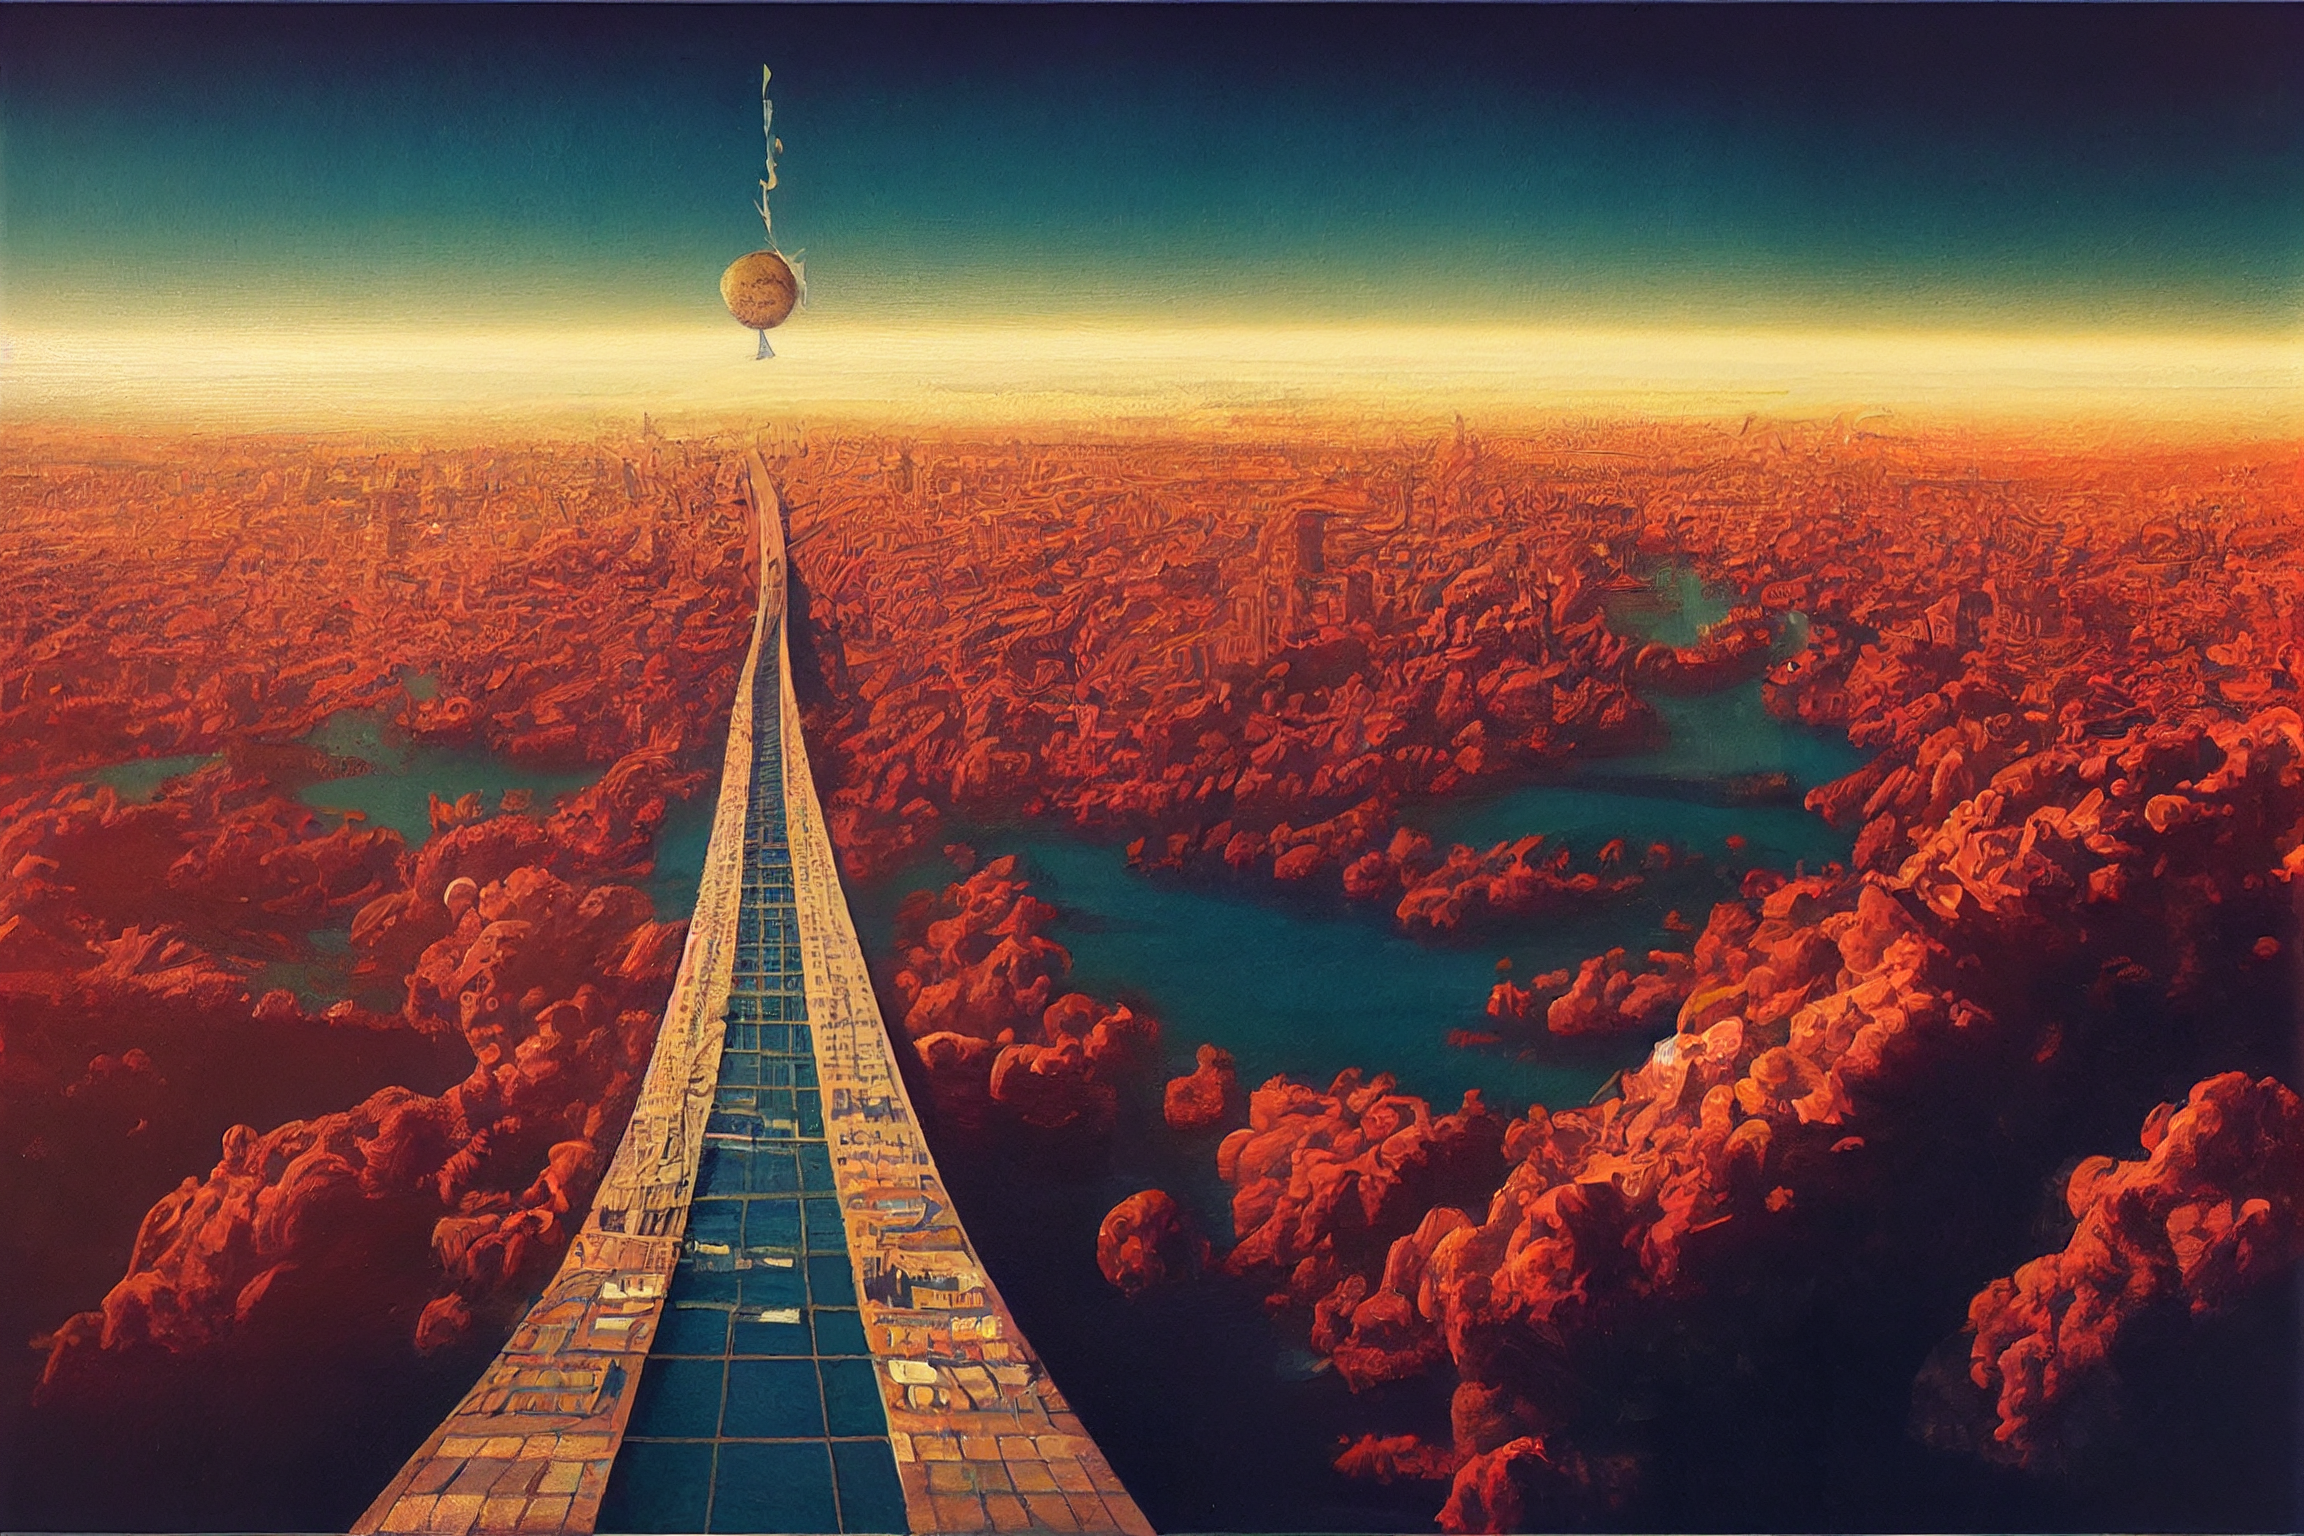 But I’ma choose what’s right and take what comes and goes – Surreal tiled road